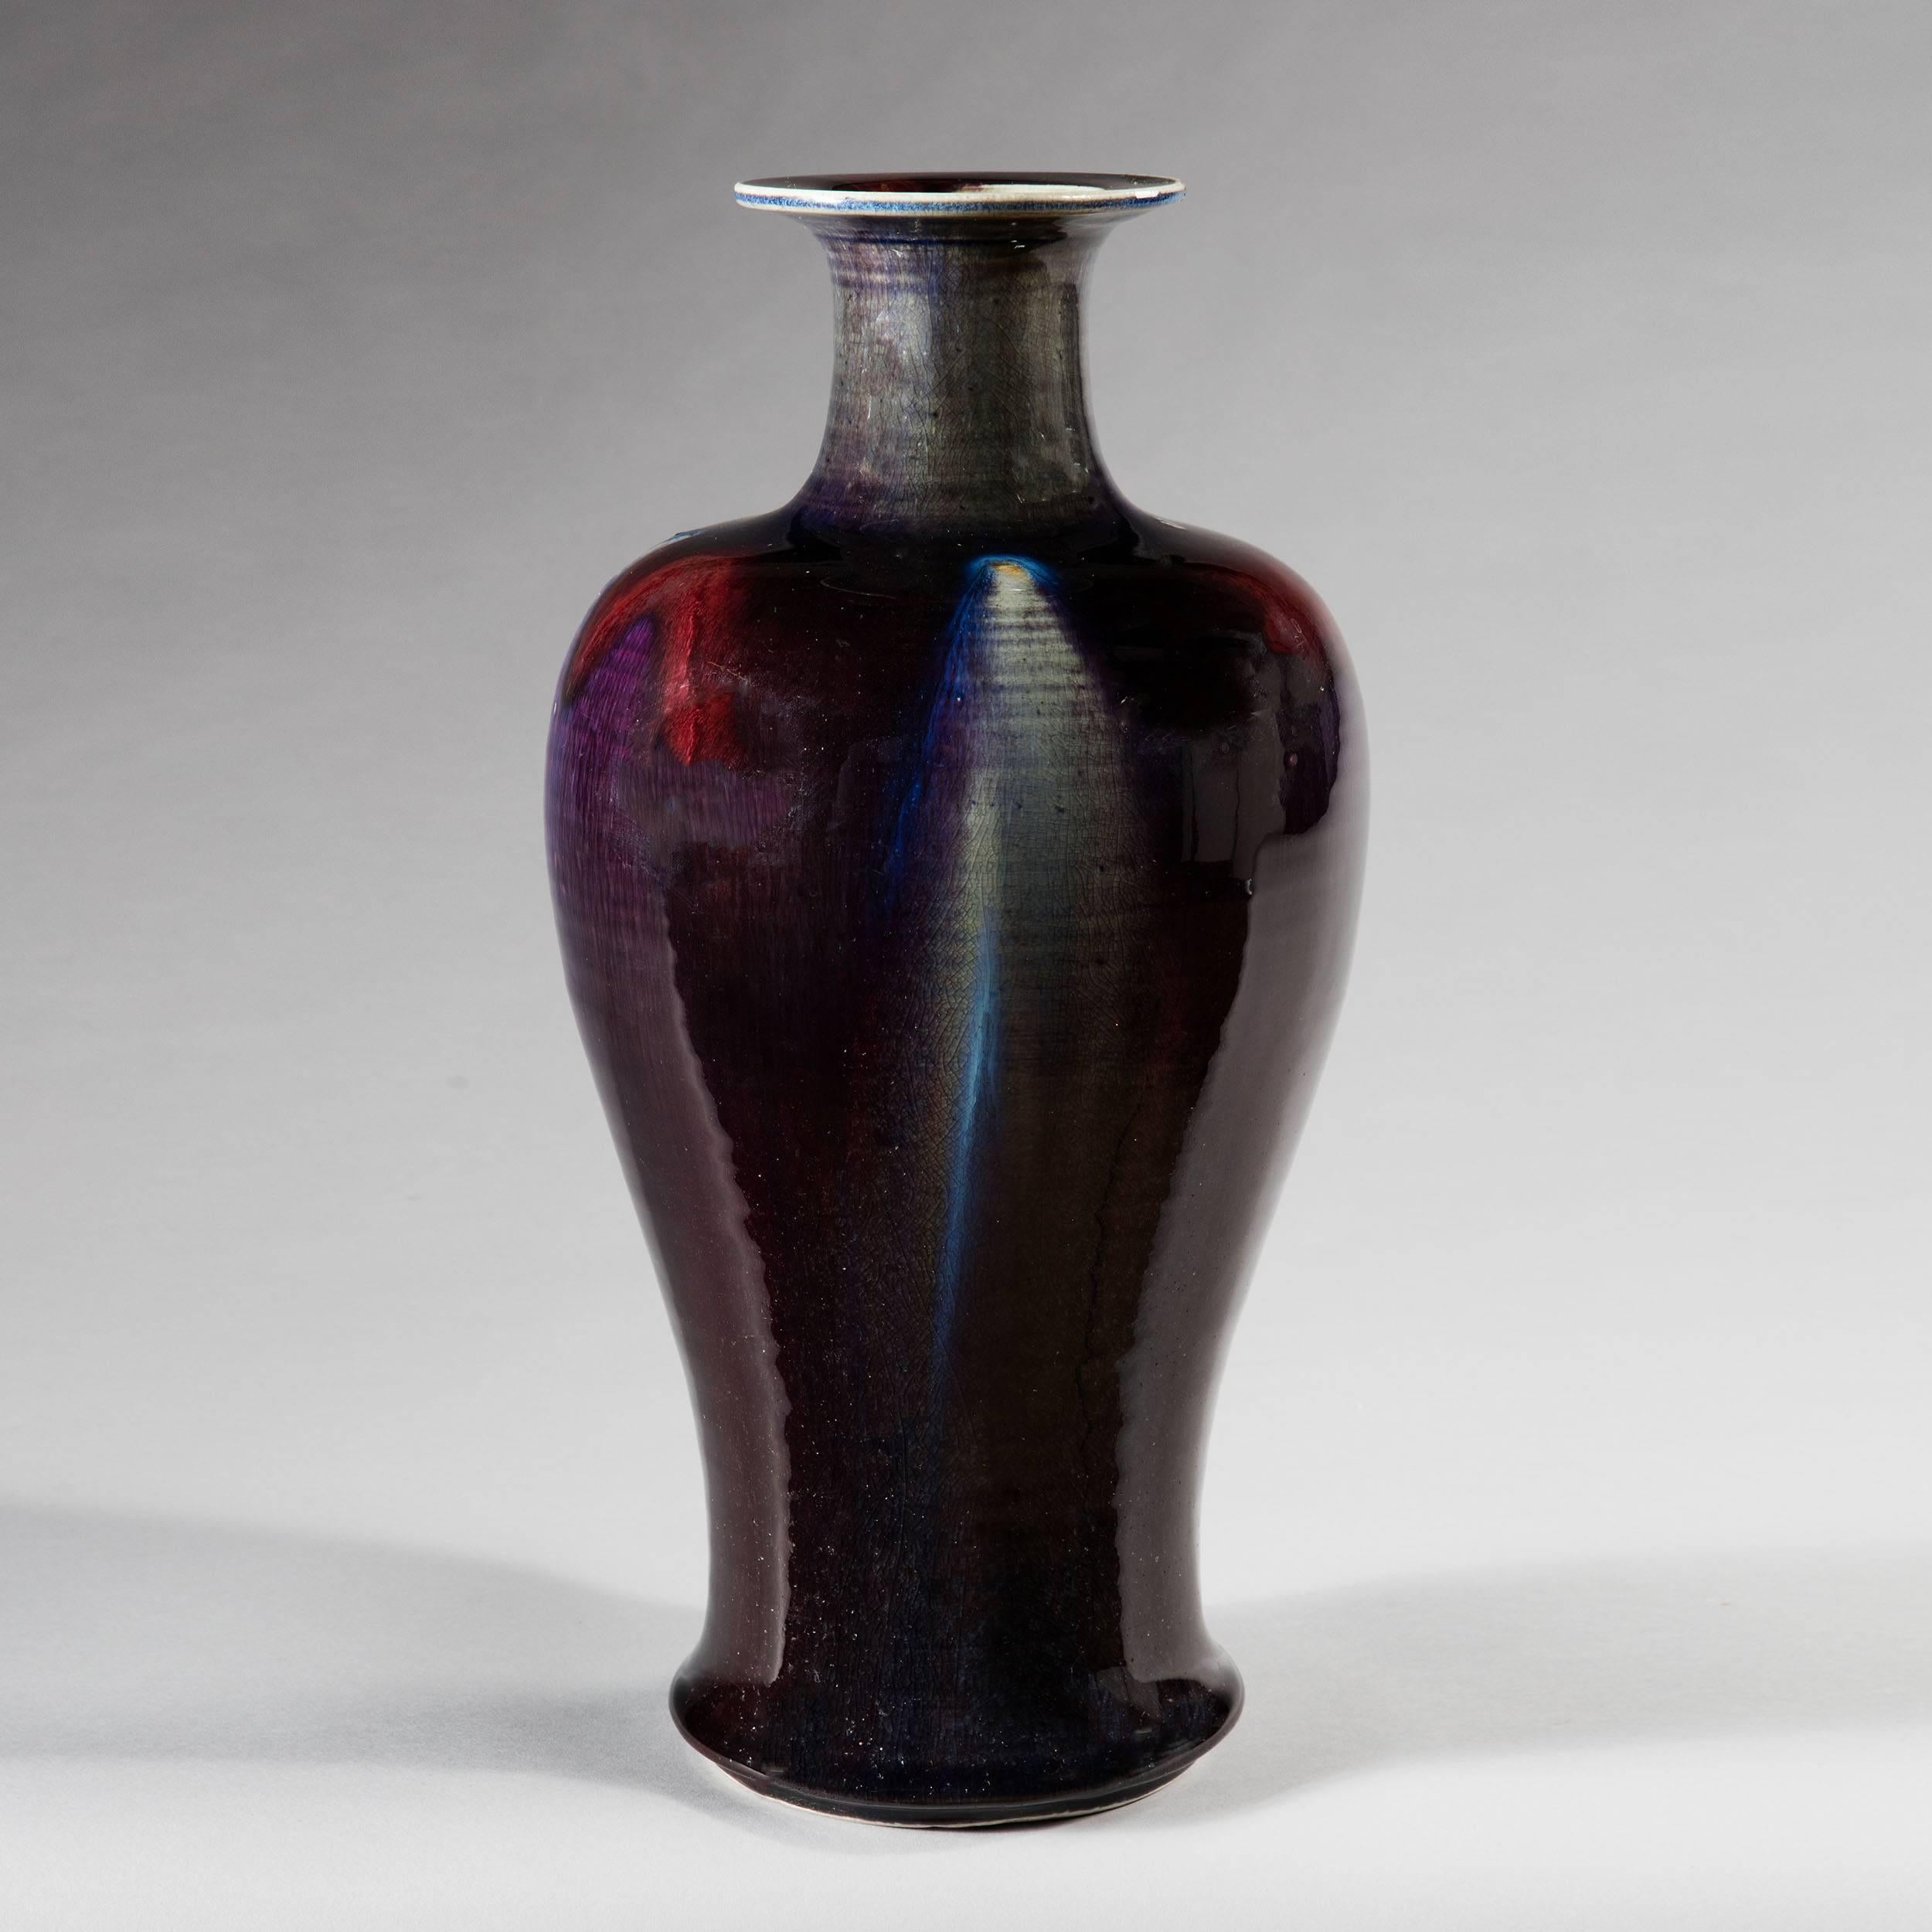 A fine 20th century flambé́ baluster vase of large-scale, with red, blue and grey coloration.